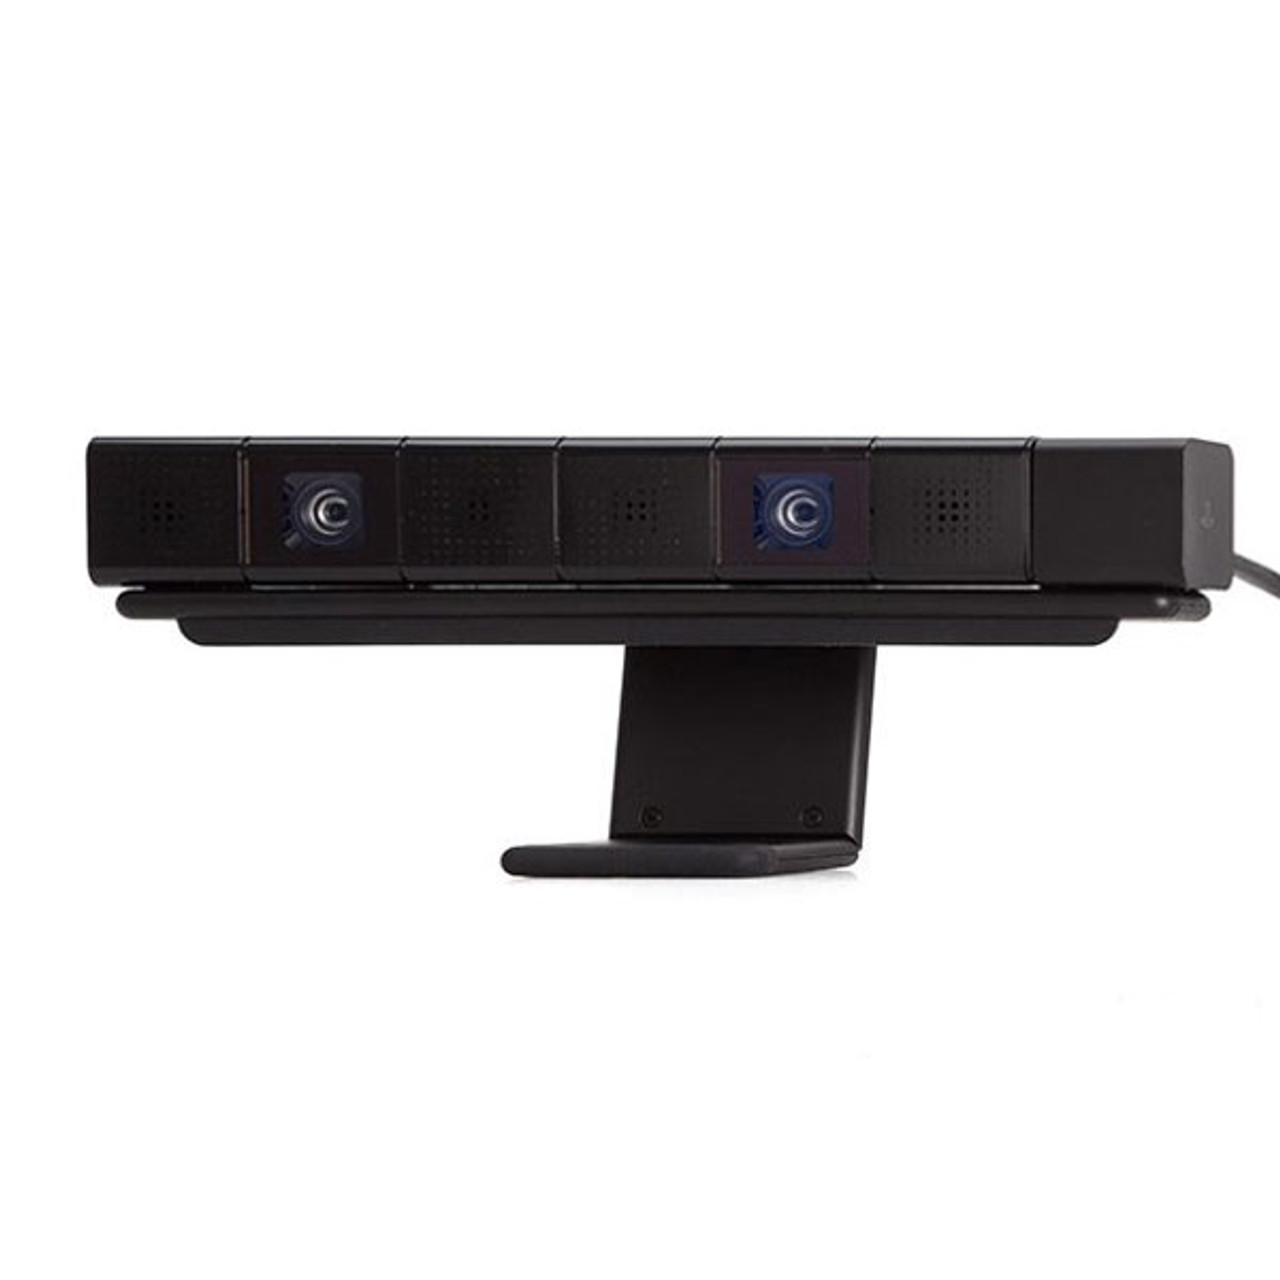  Sony Playstation 4 Camera (PS4) : Video Games